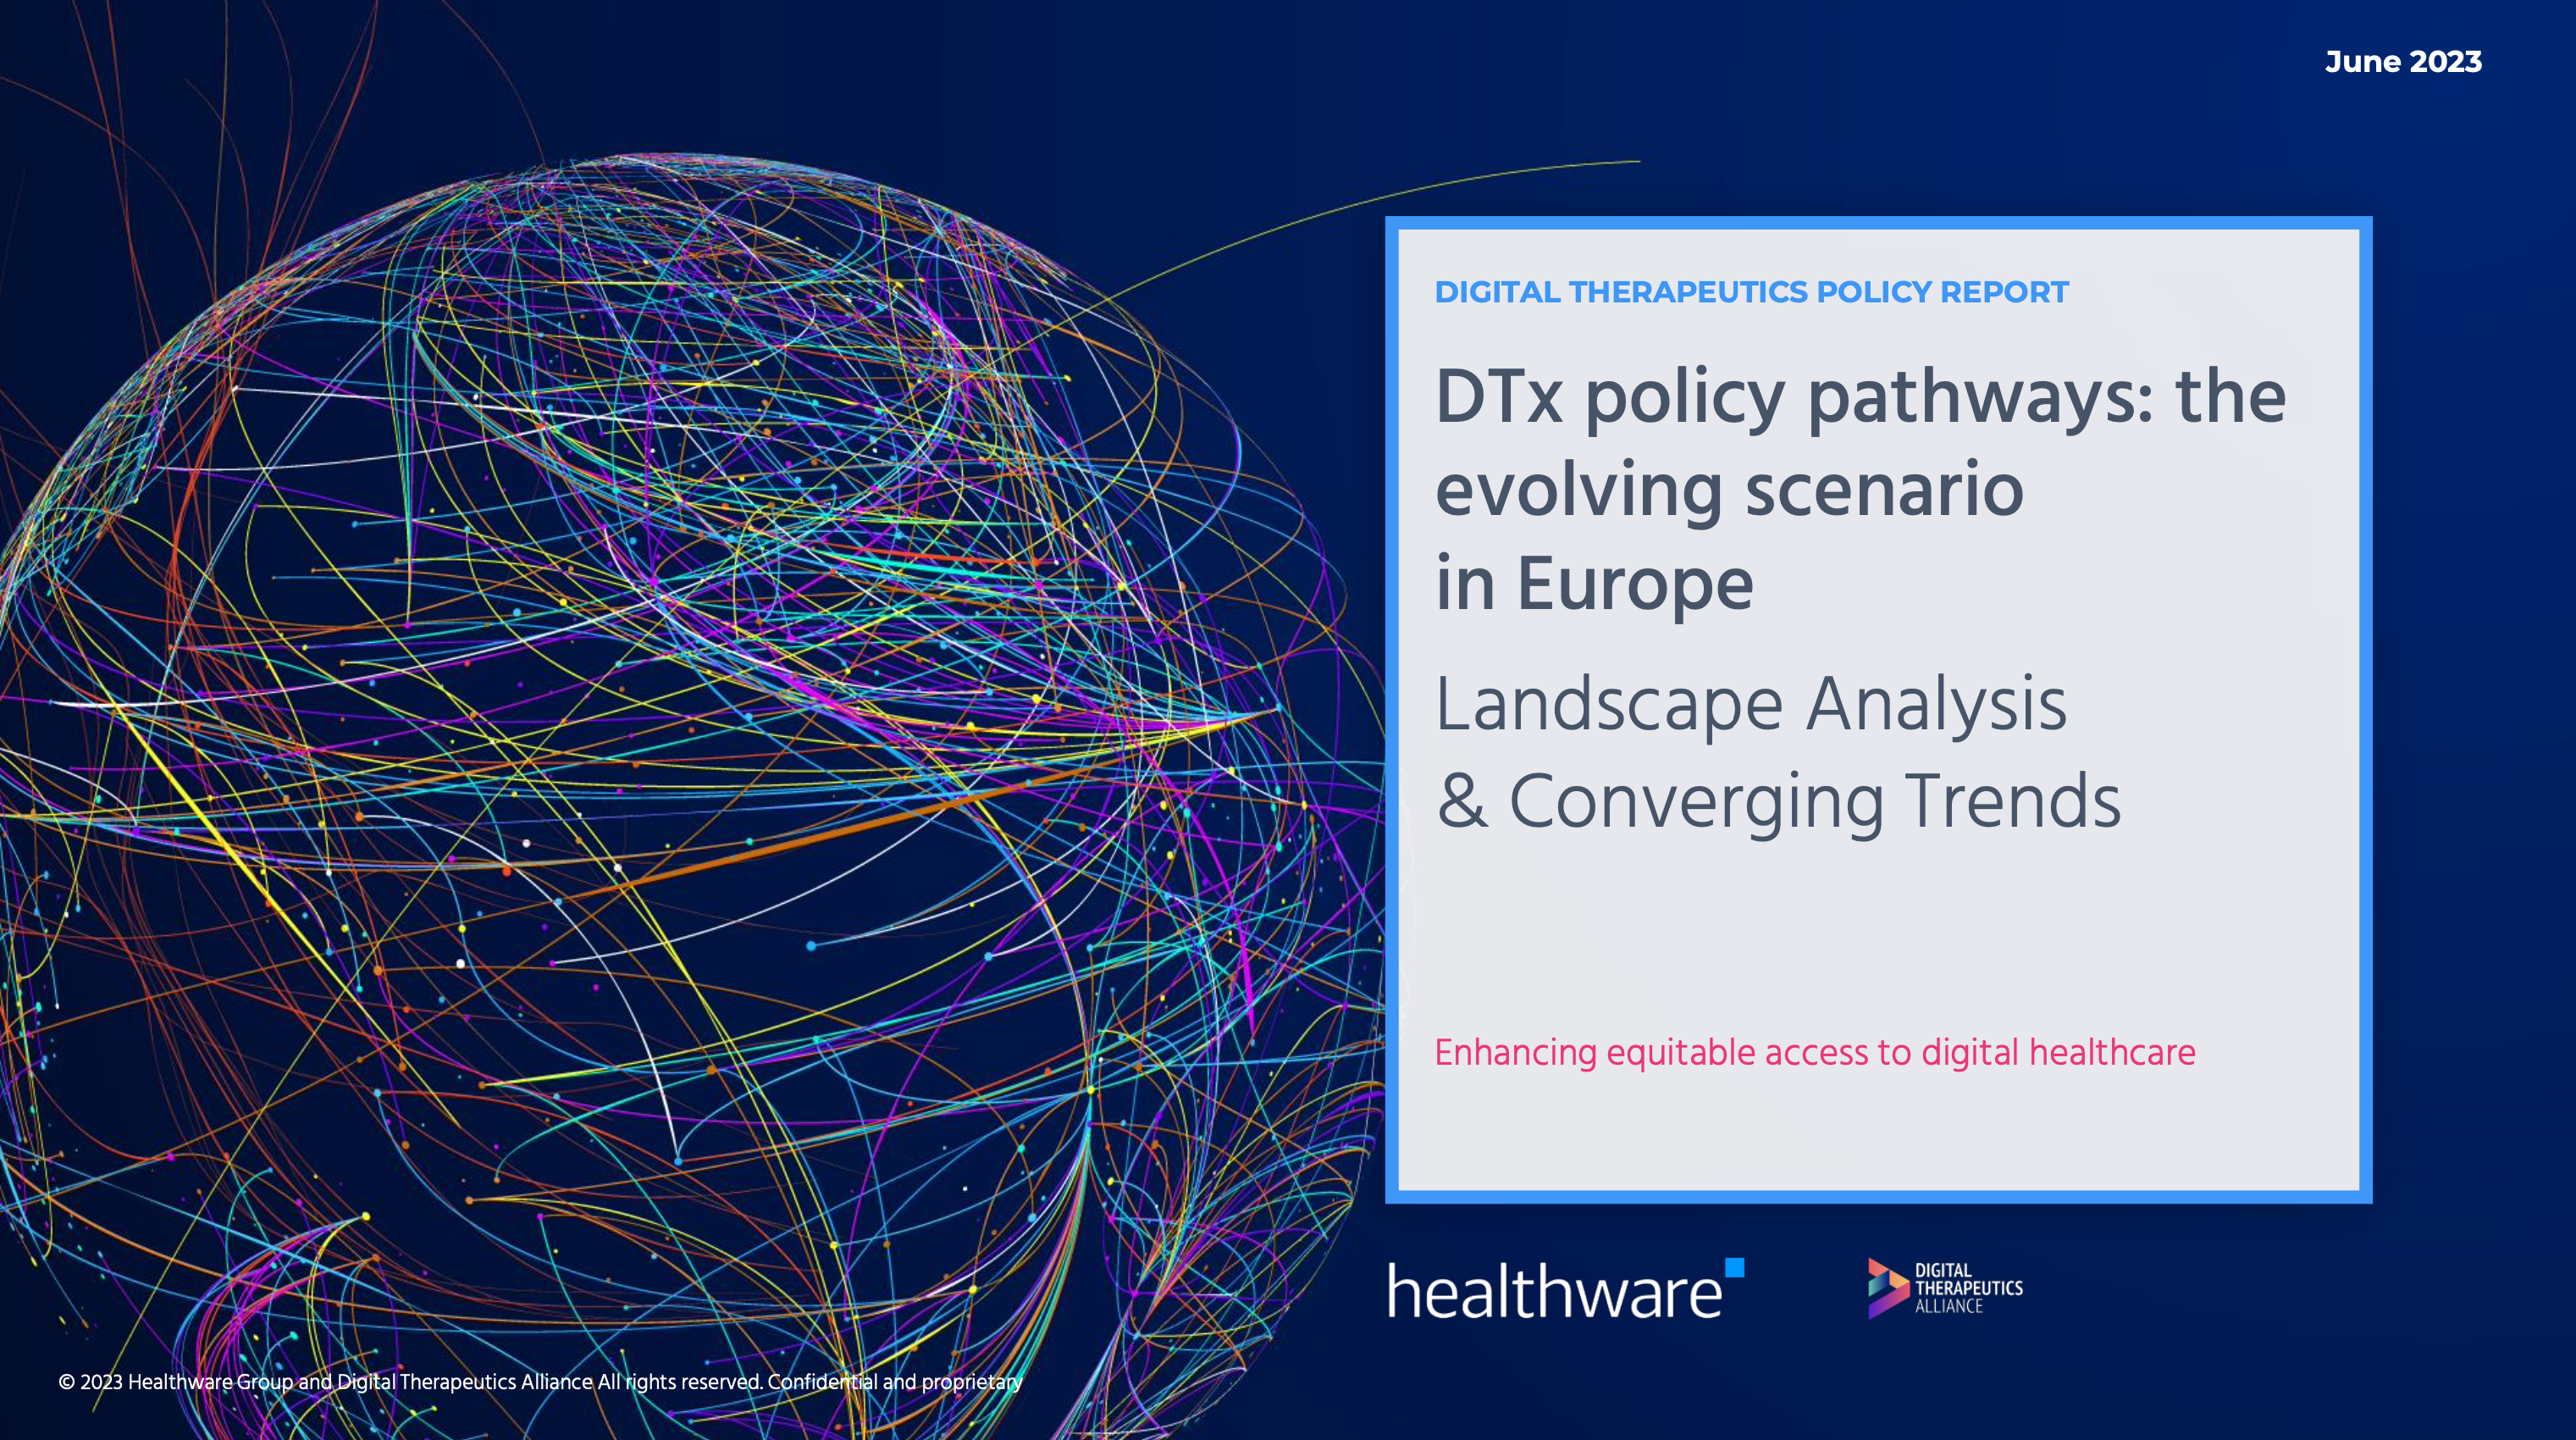 Exclusive: Digital Therapeutics Alliance, Healthware recommend digital therapeutics policy pathways in Europe